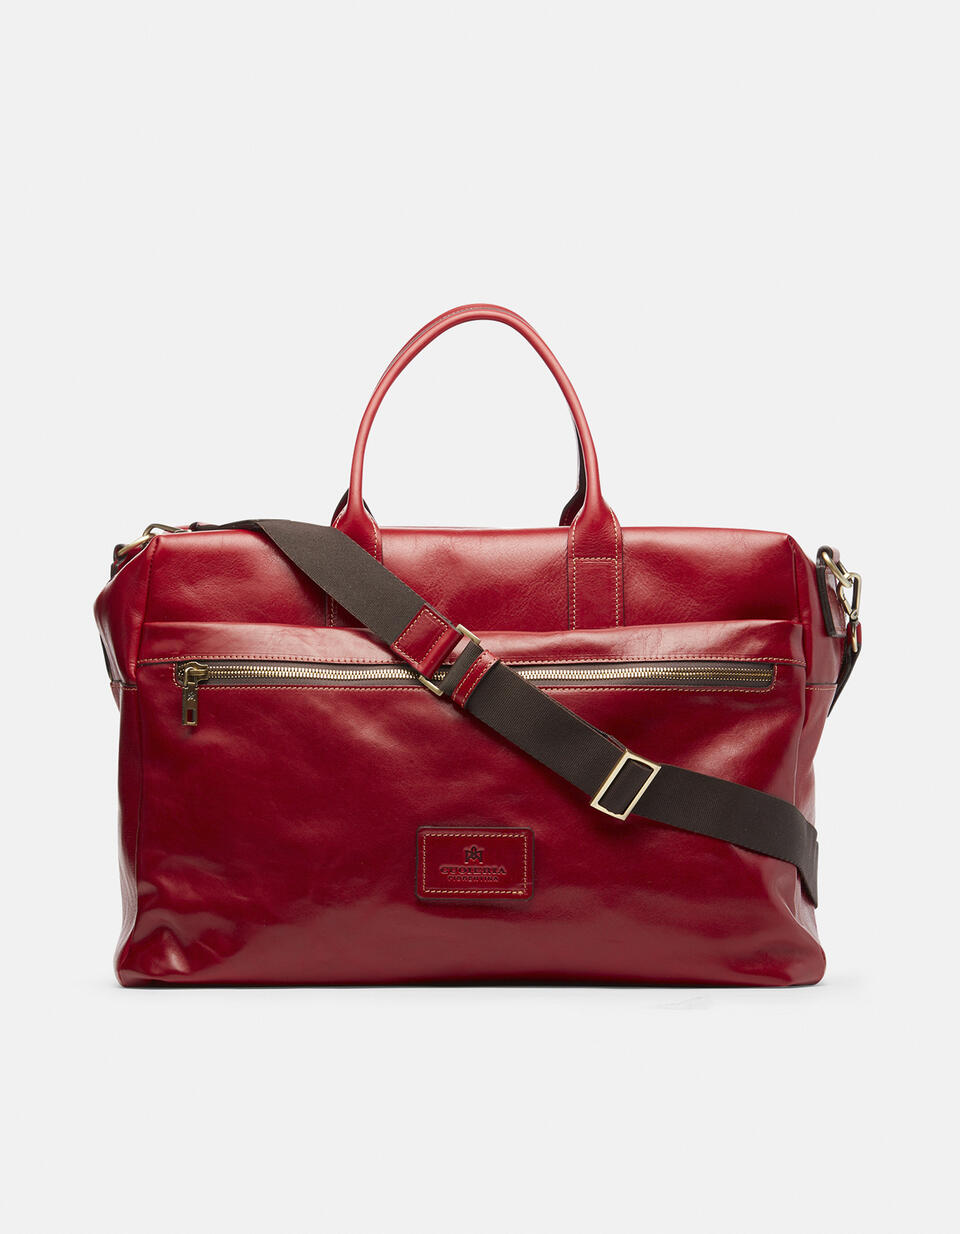 Tokyo small weekender bag - Luggage | TRAVEL BAGS  - Luggage | TRAVEL BAGSCuoieria Fiorentina